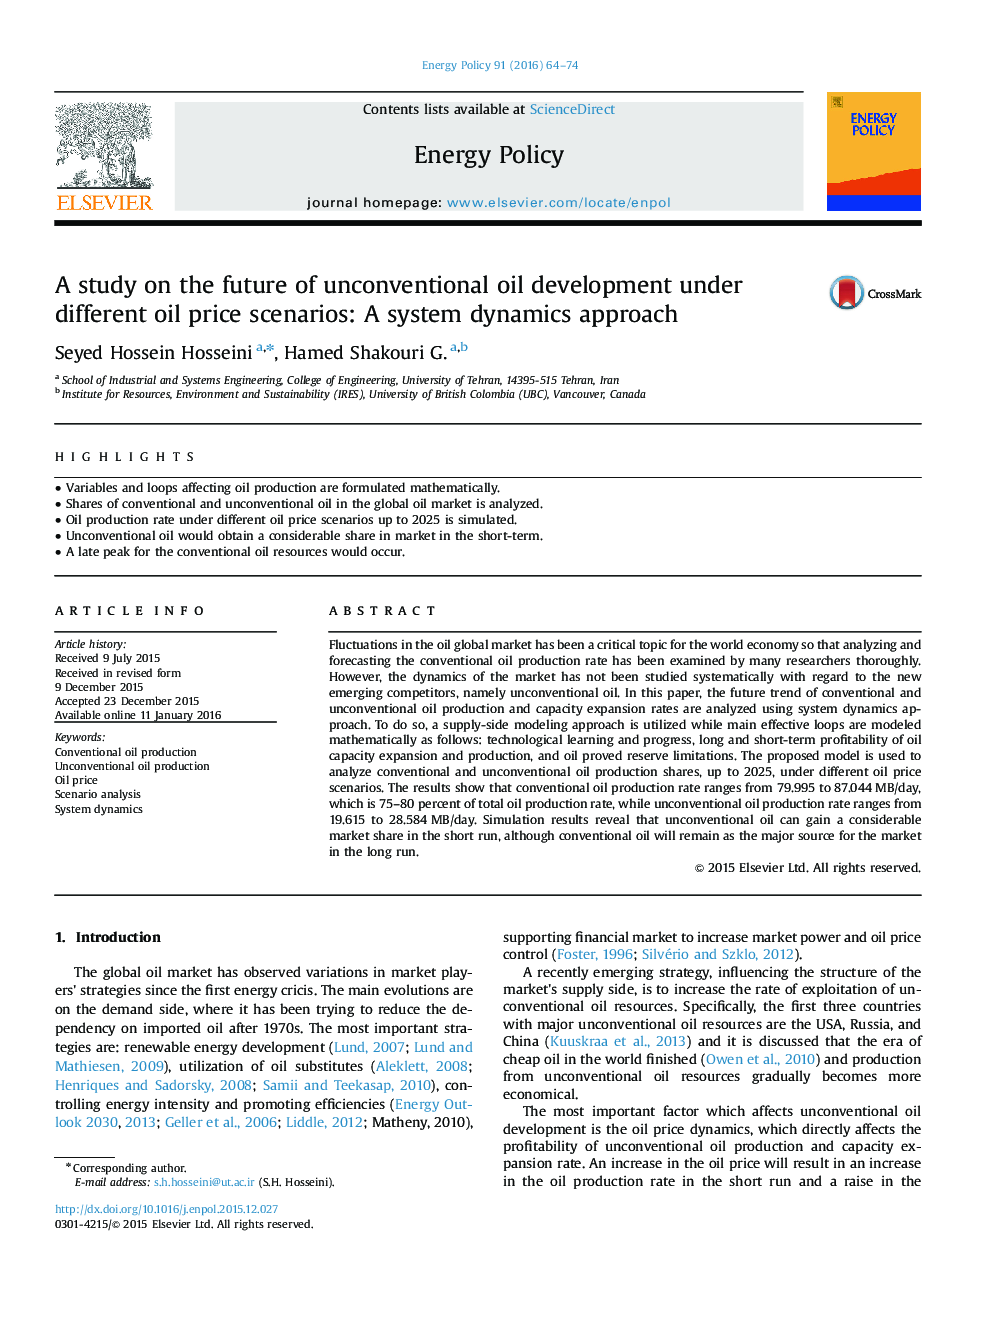 A study on the future of unconventional oil development under different oil price scenarios: A system dynamics approach